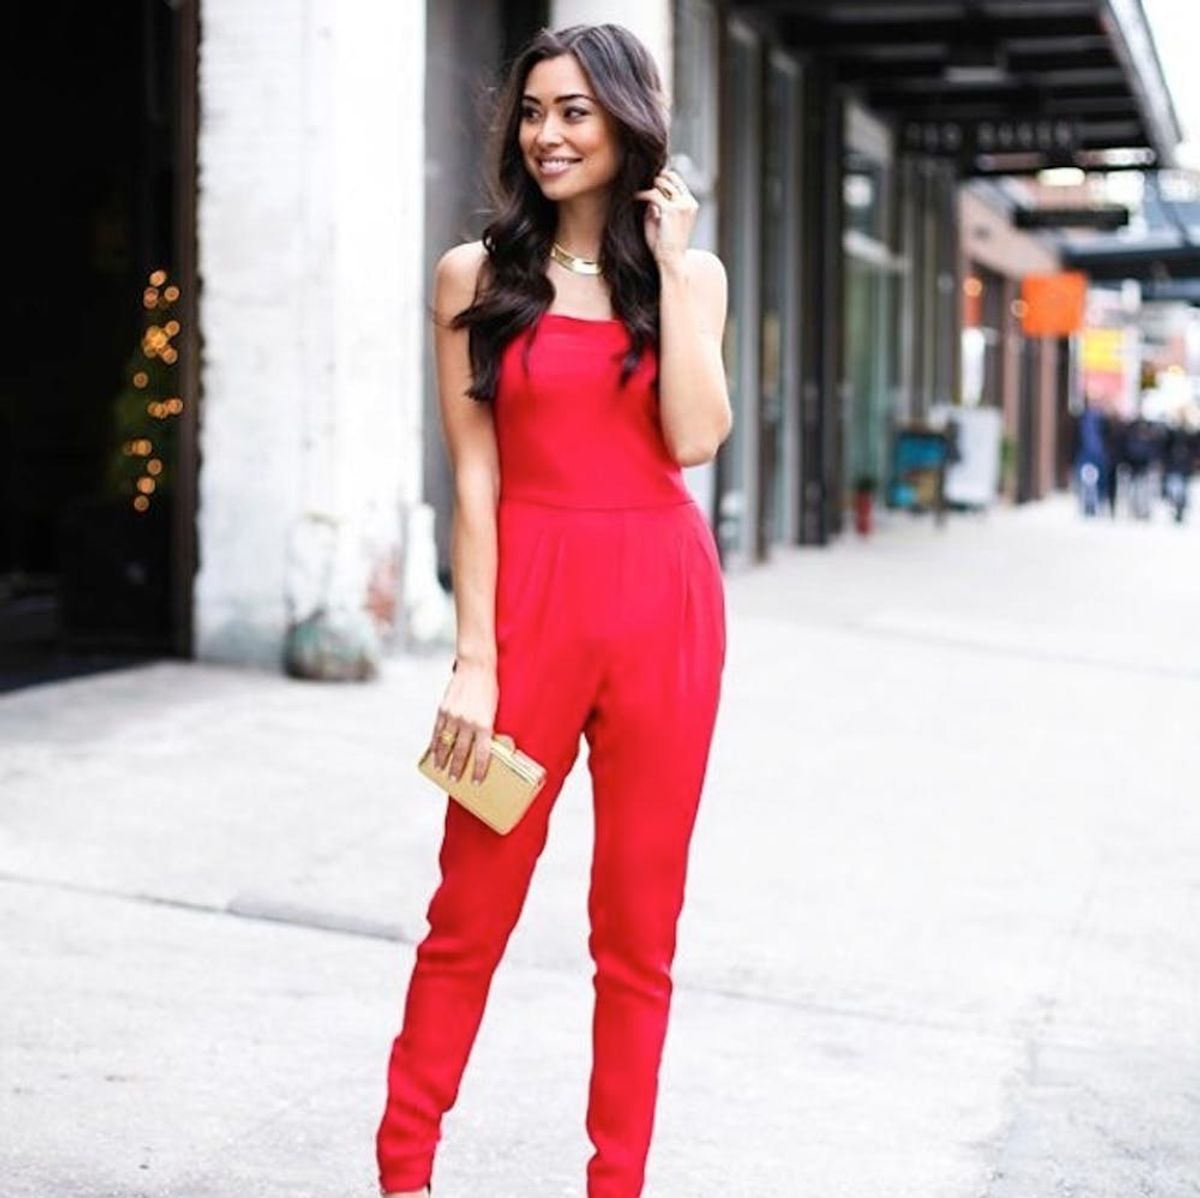 Here’s How Style Bloggers Dress for Valentine’s Day